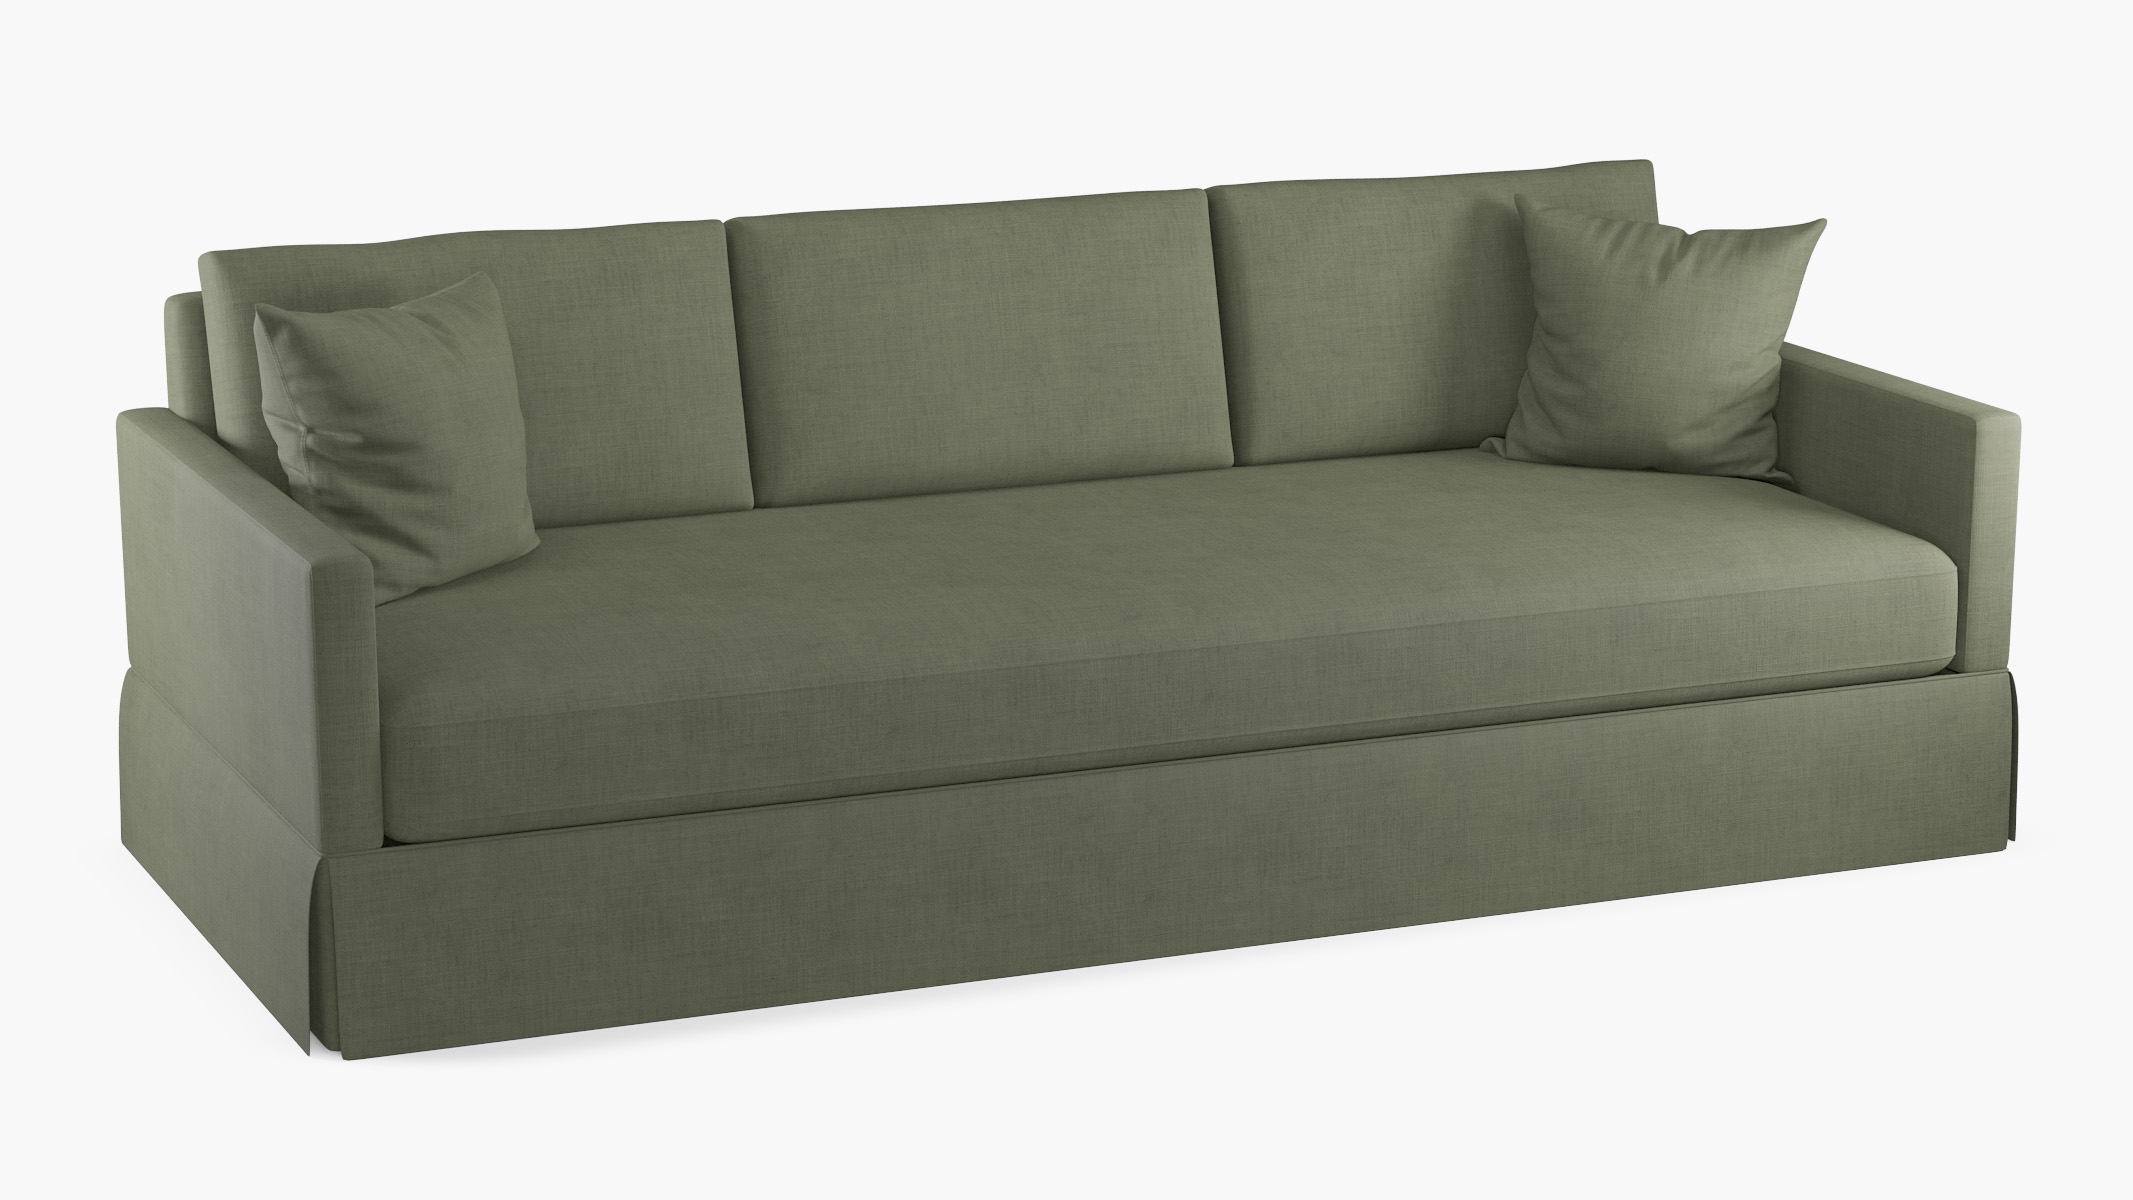 Skirted Track Arm Sofa, Moss Luxe Linen, Standard (39") - Image 1